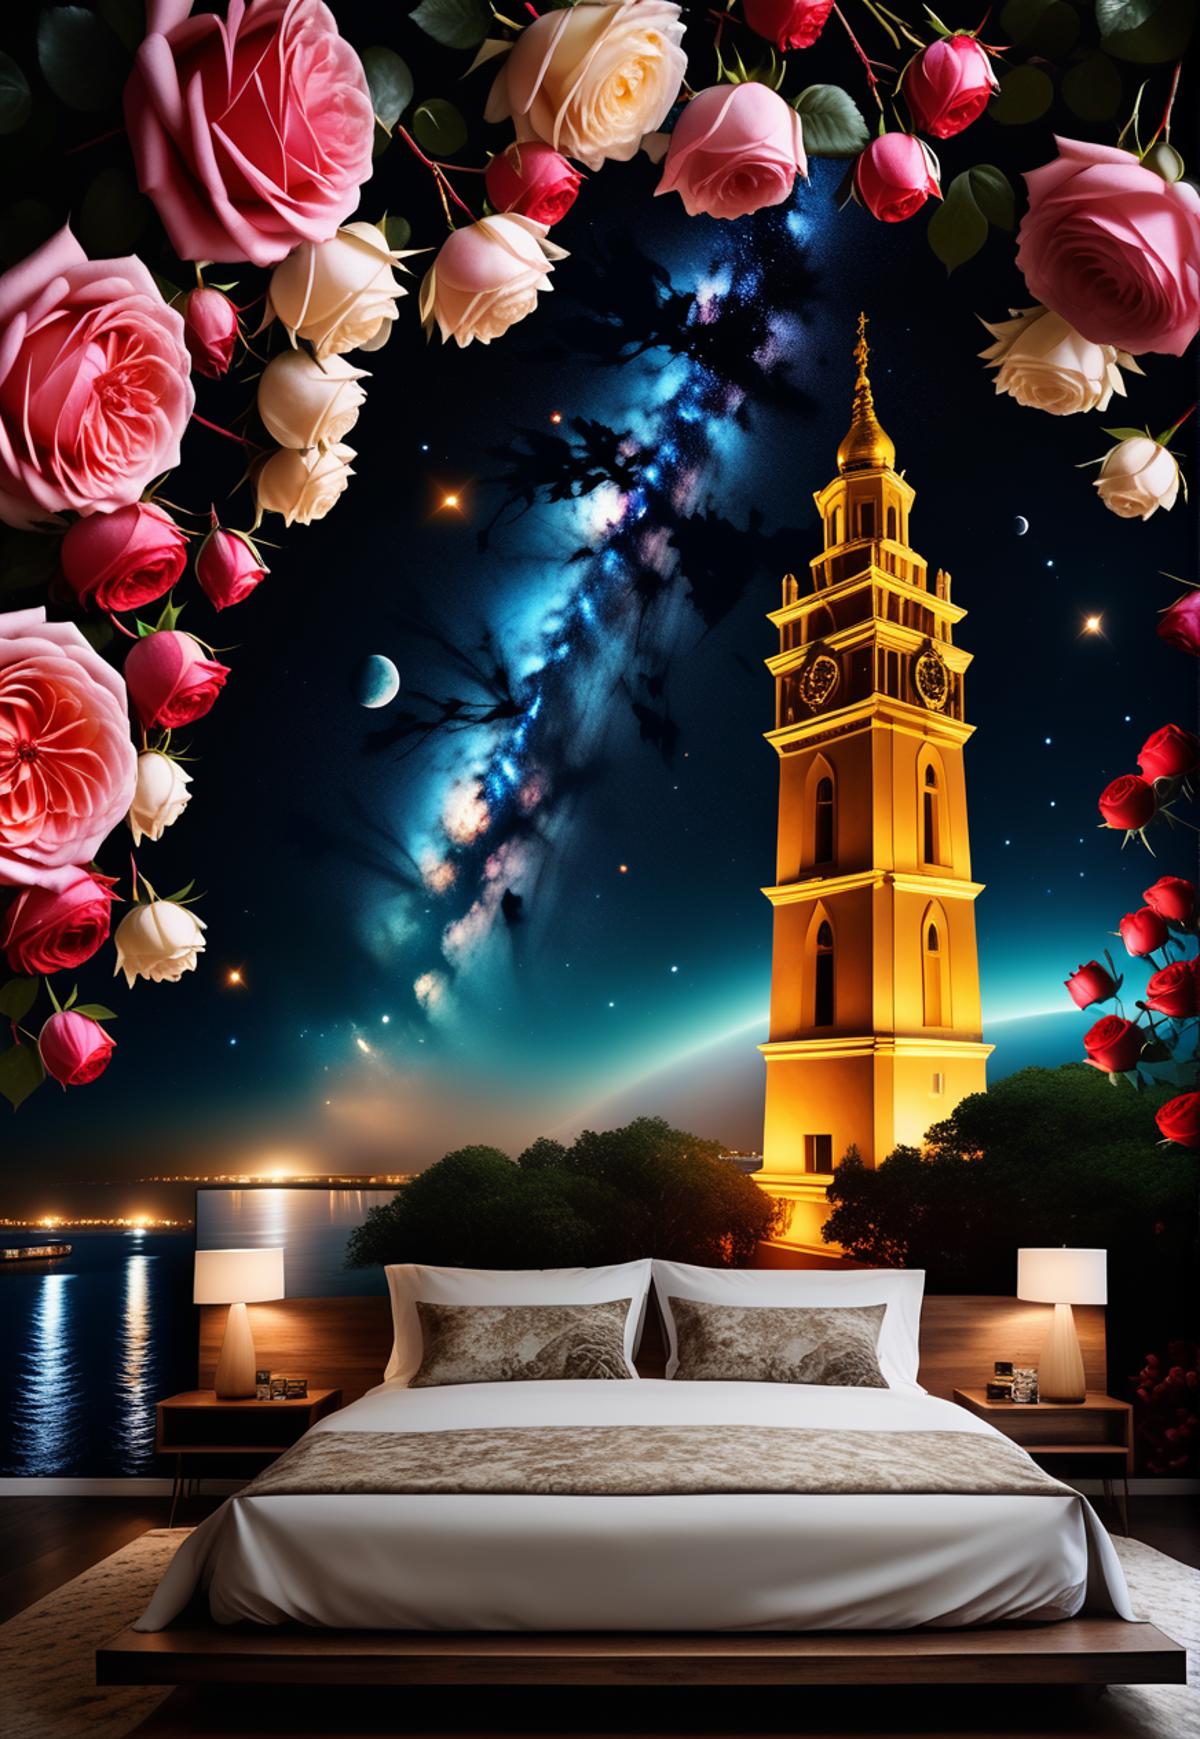 A bedroom scene featuring a bed with white pillows in front of a large clock tower at night.